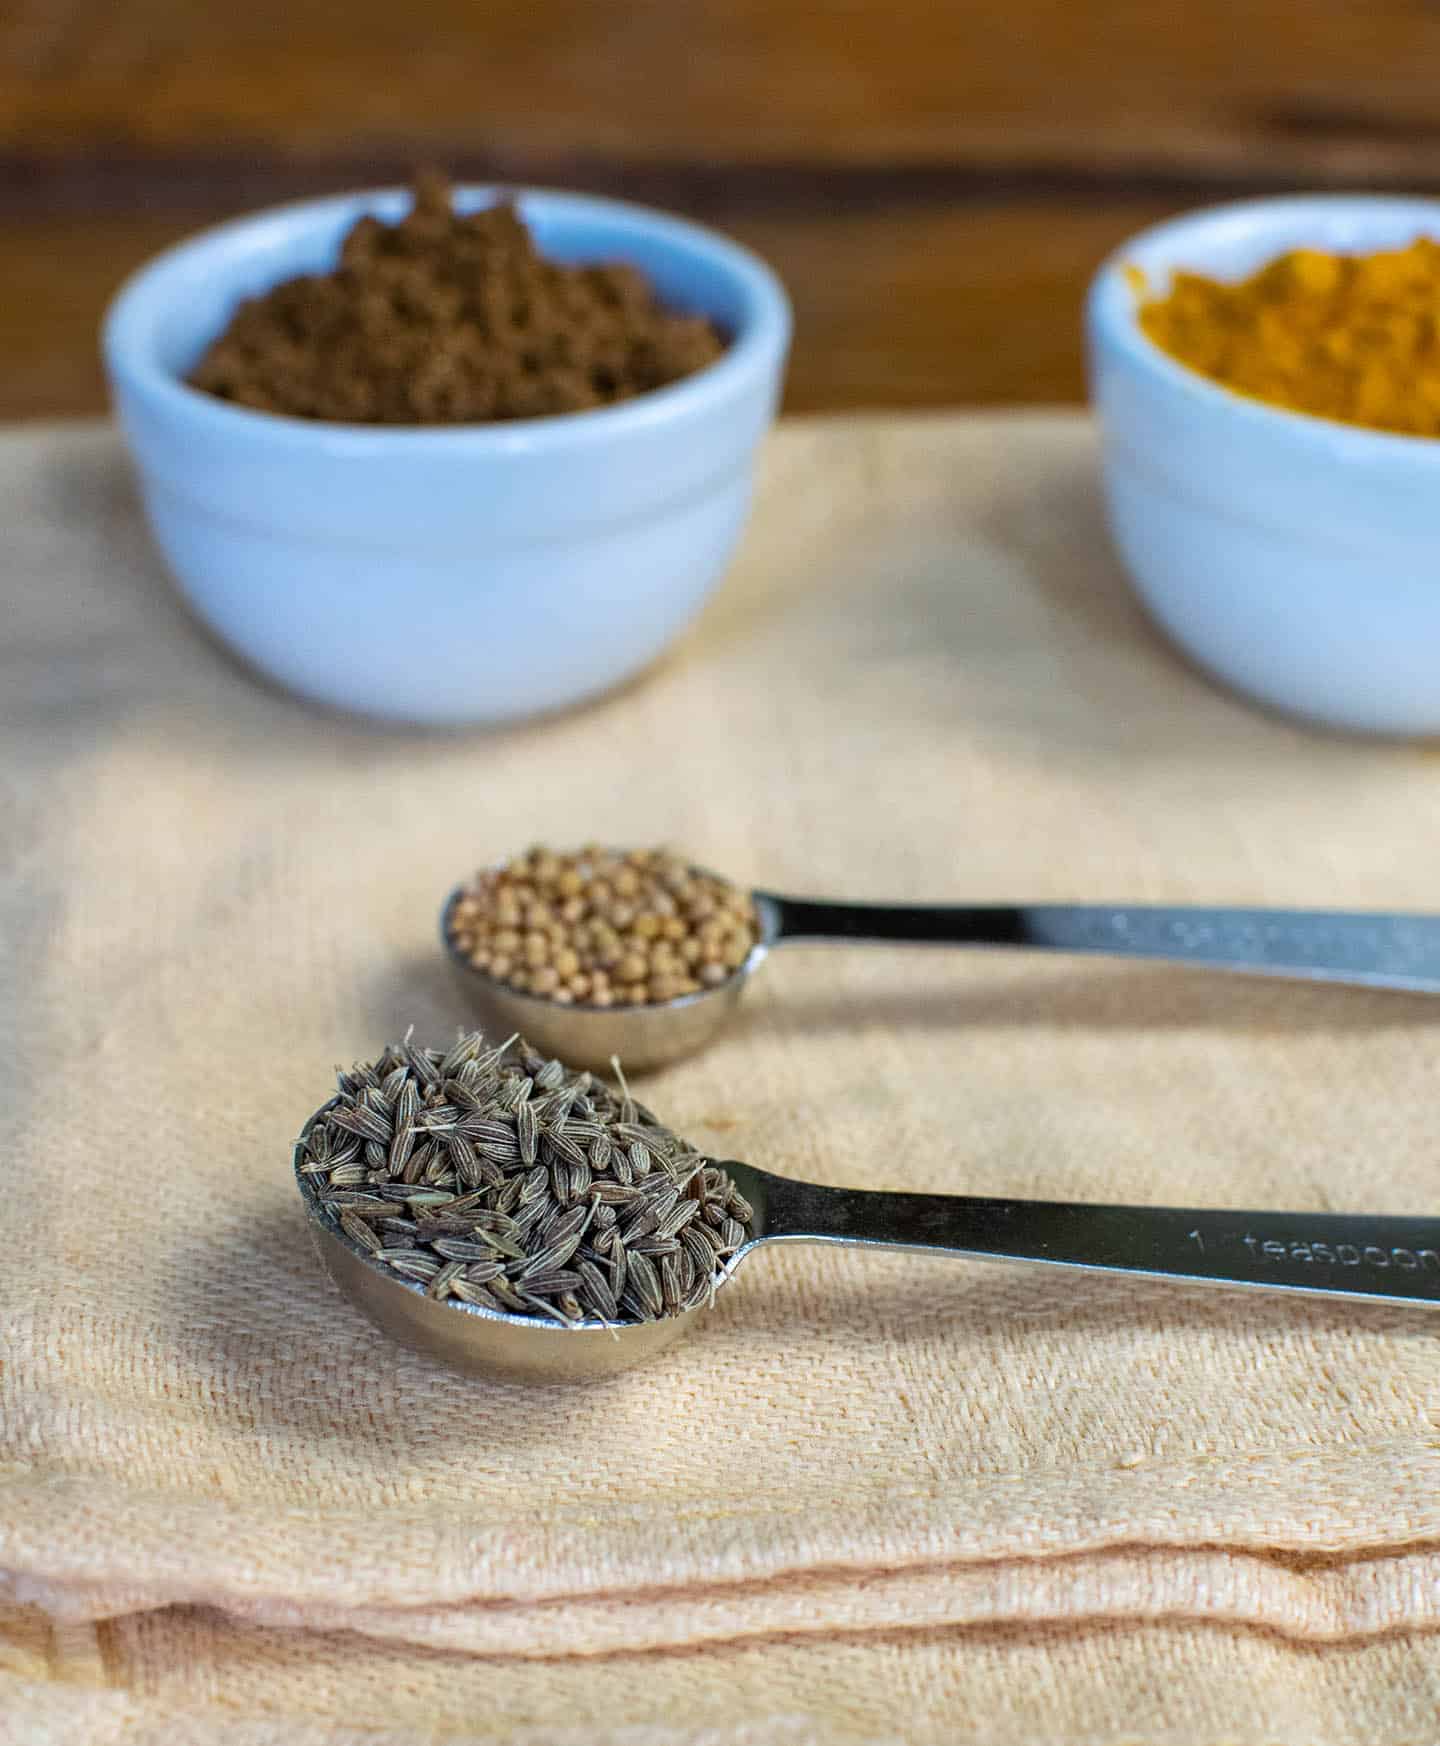 Spices laid out on an orange cloth, showing cumin seeds, garam masala, cumin and turmeric.